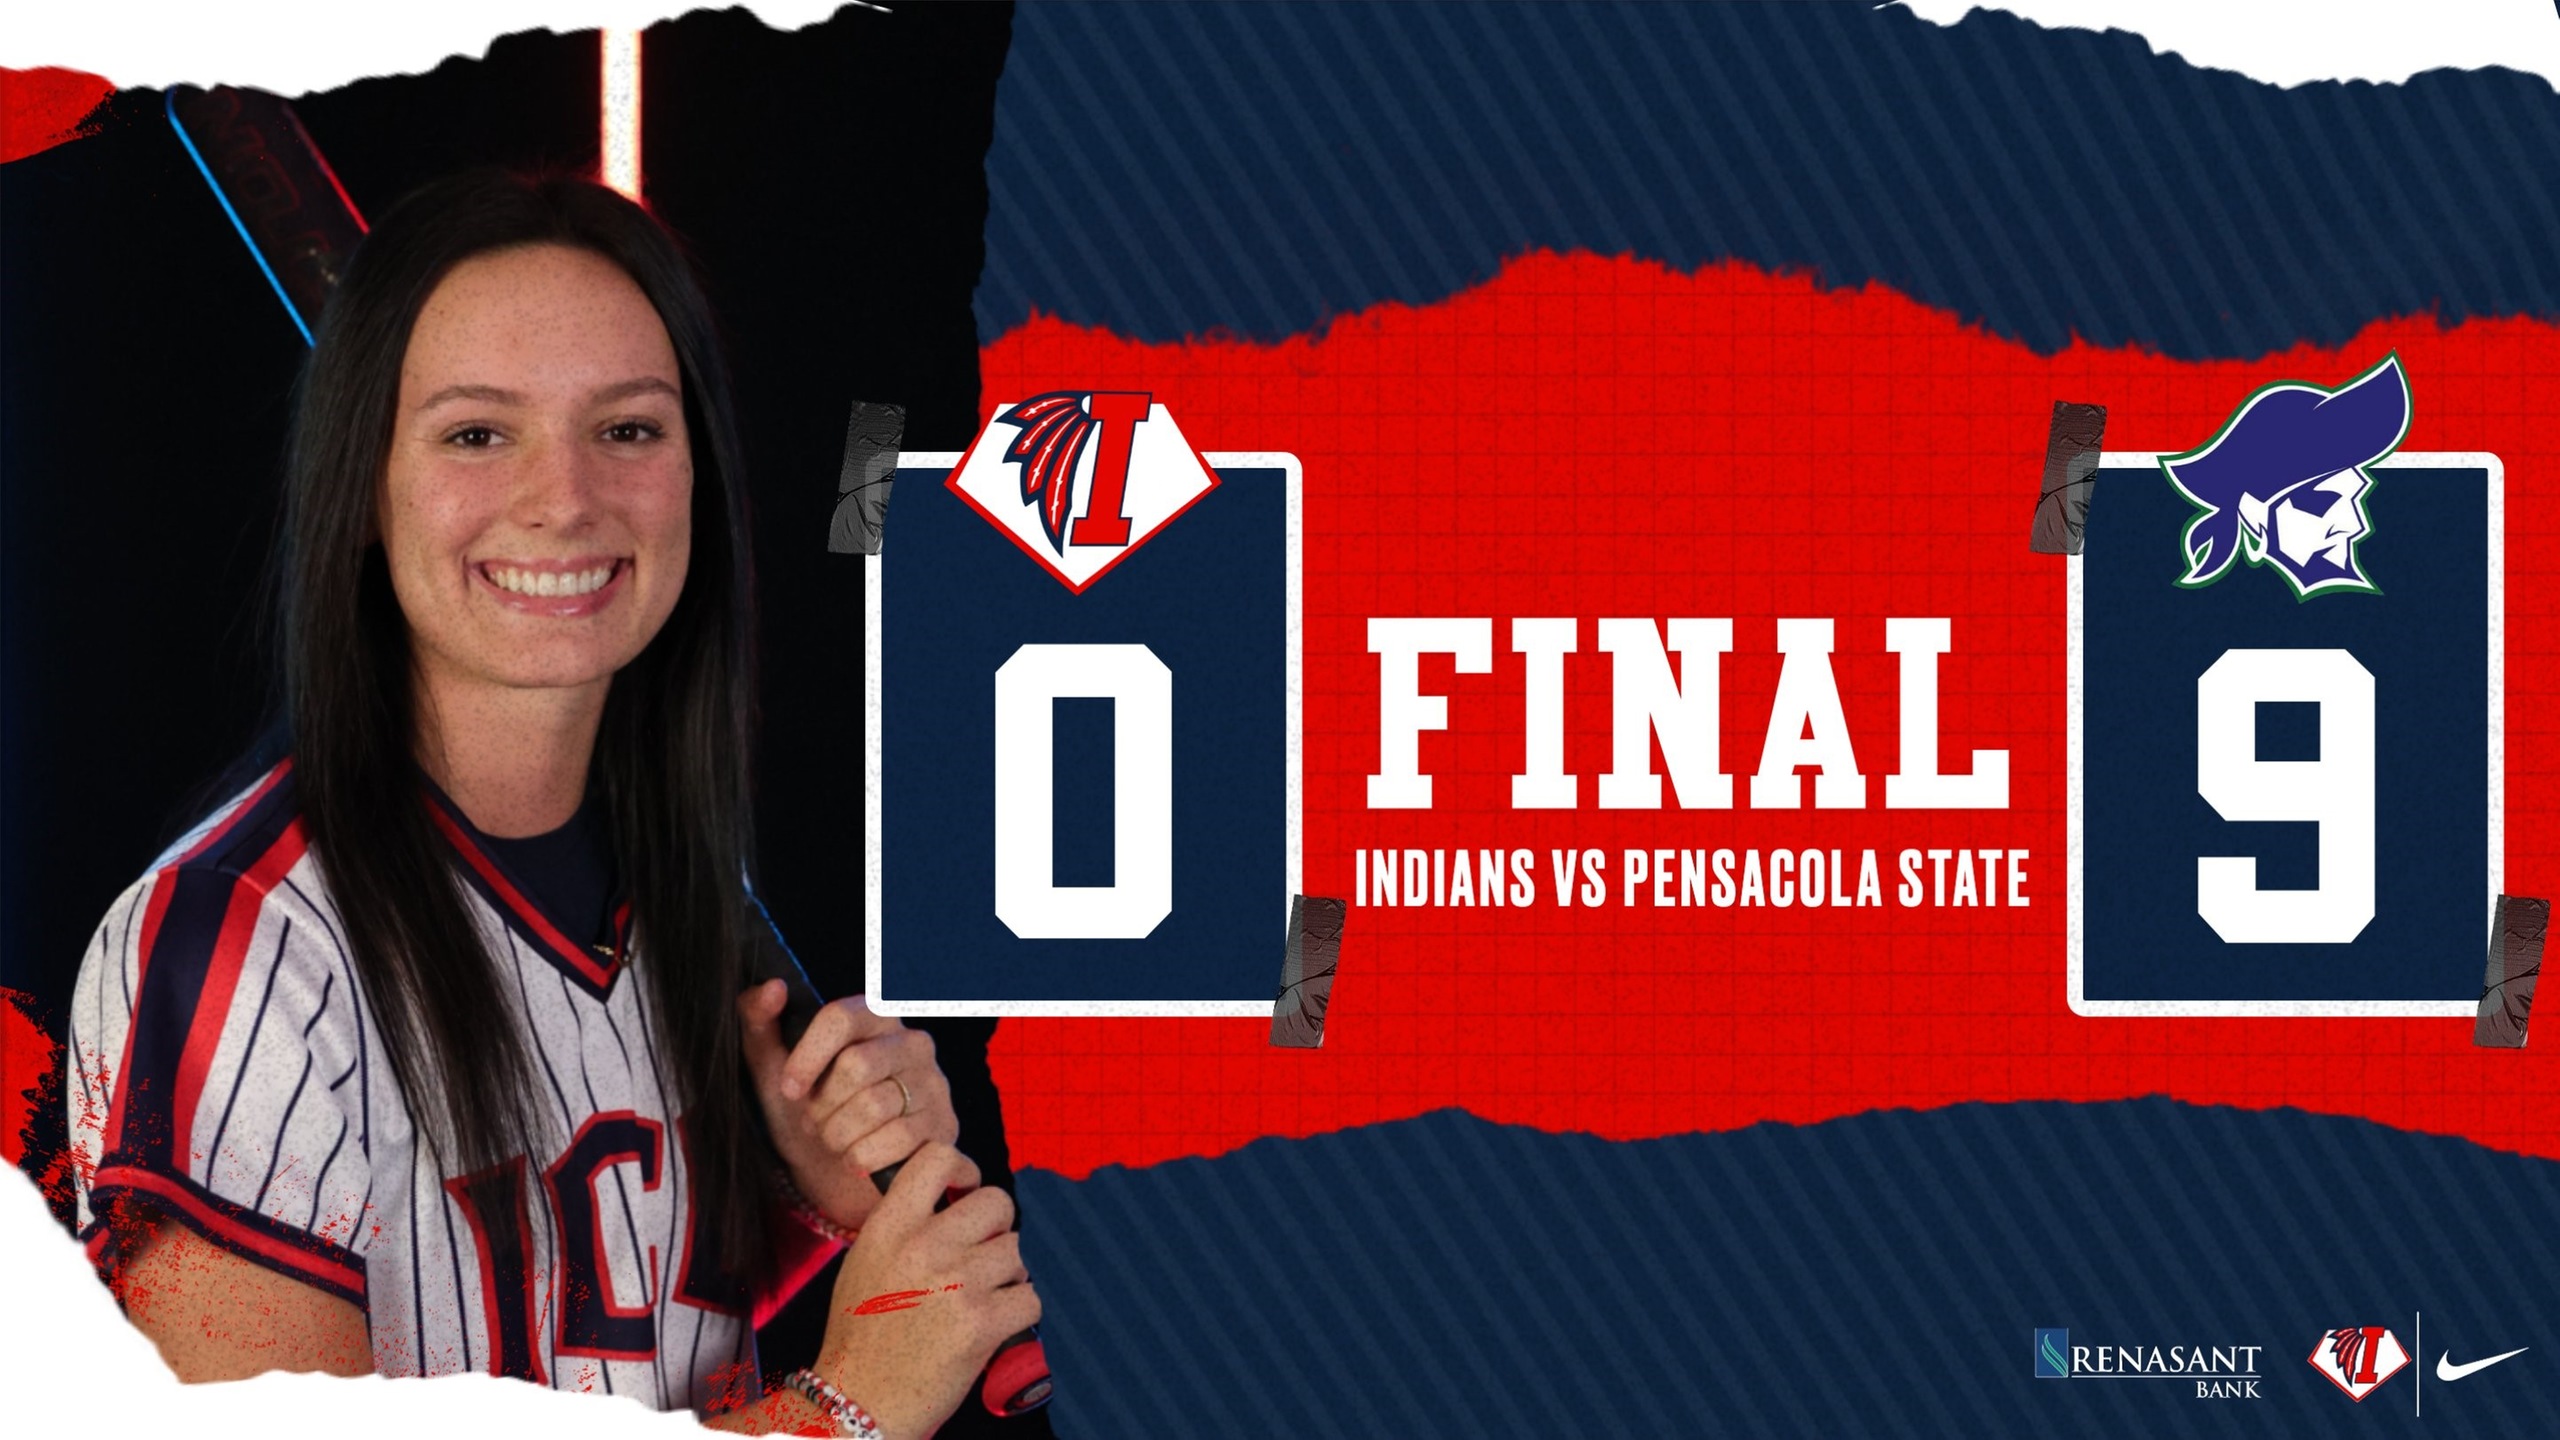 Indians fall to Pensacola State